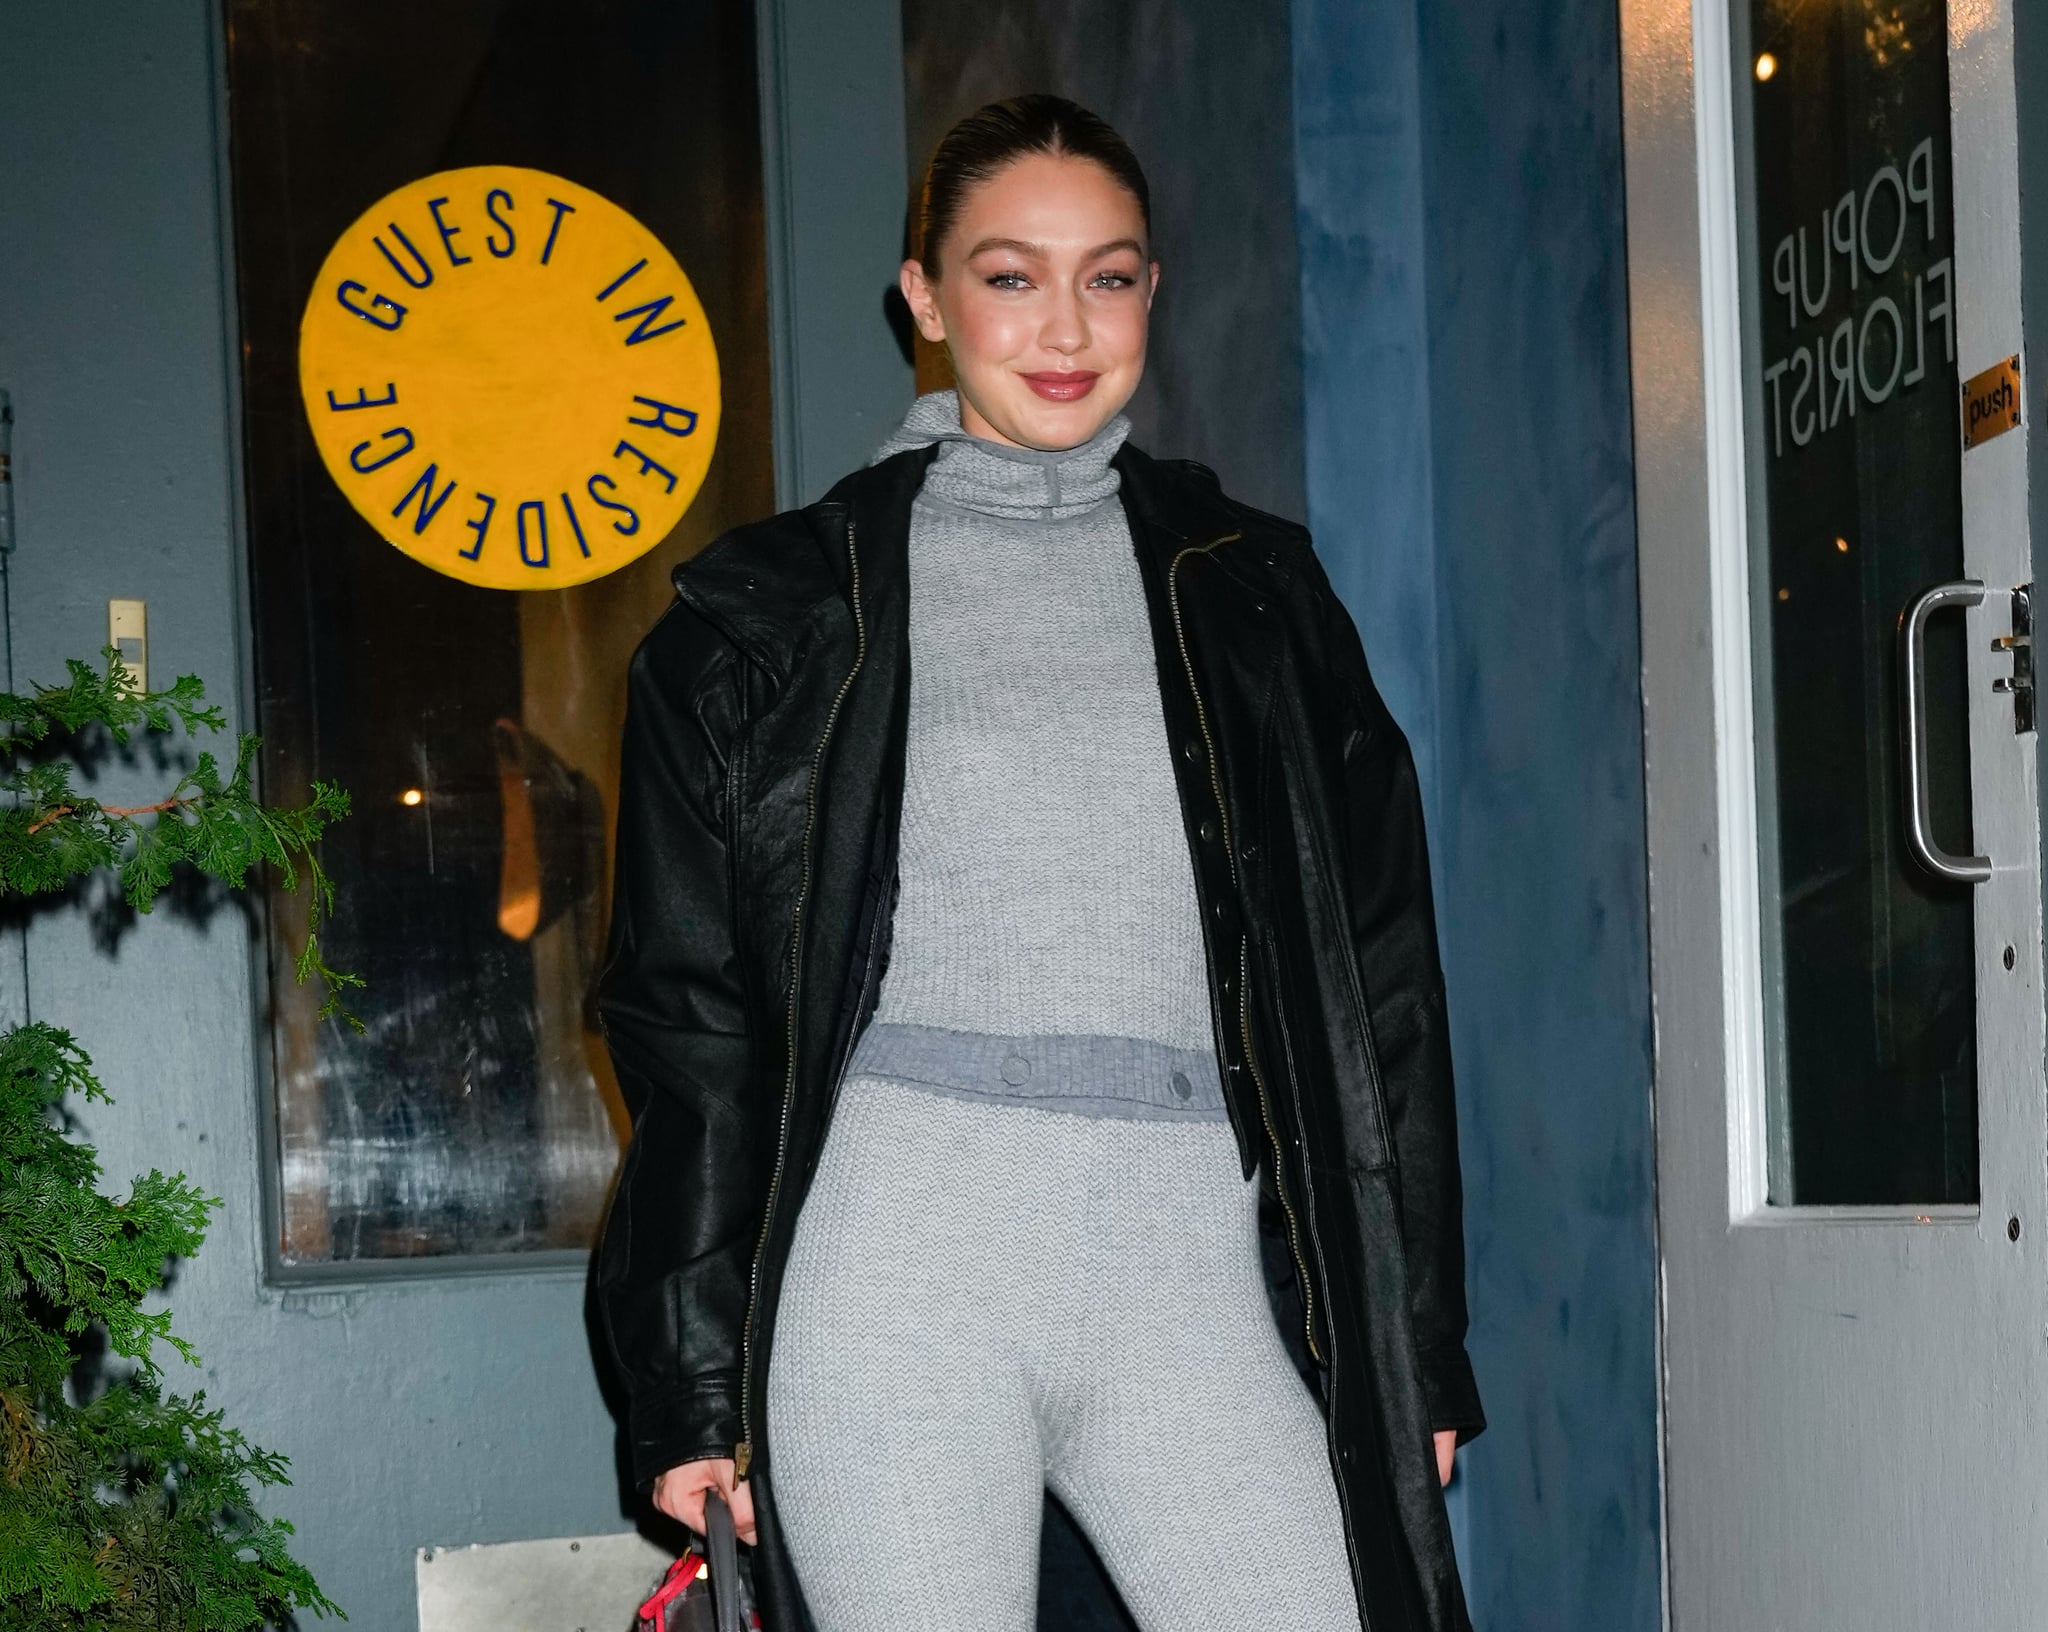 Gigi Hadid is seen making a special appearance at the popup store of her brand 'Guest in Residence' on November 29, 2022 in New York City. (Photo by Gotham/GC Images)